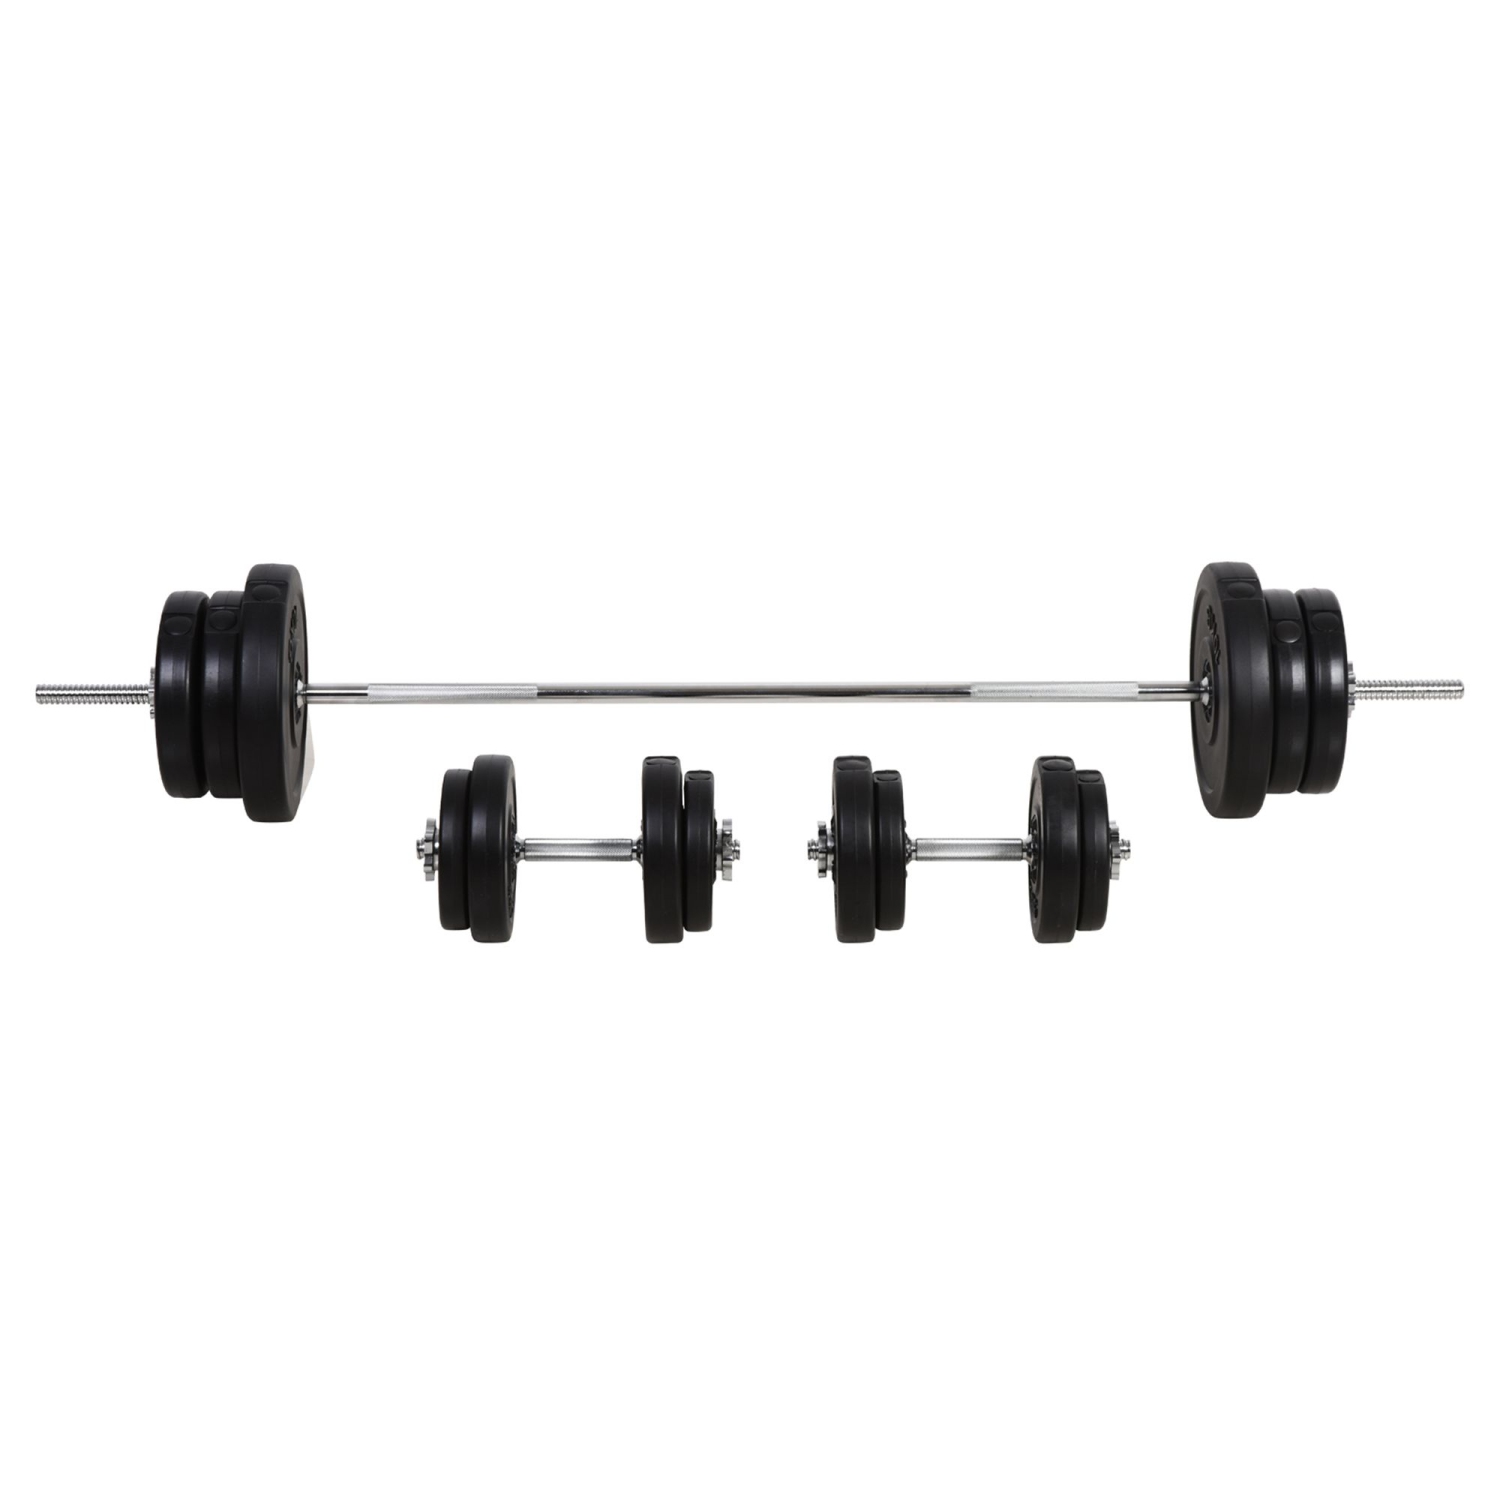 Soozier 145lbs Dumbbell & Barbell Adjustable Set Plate Bar Clamp Rod Home Gym Sports Area Exercise